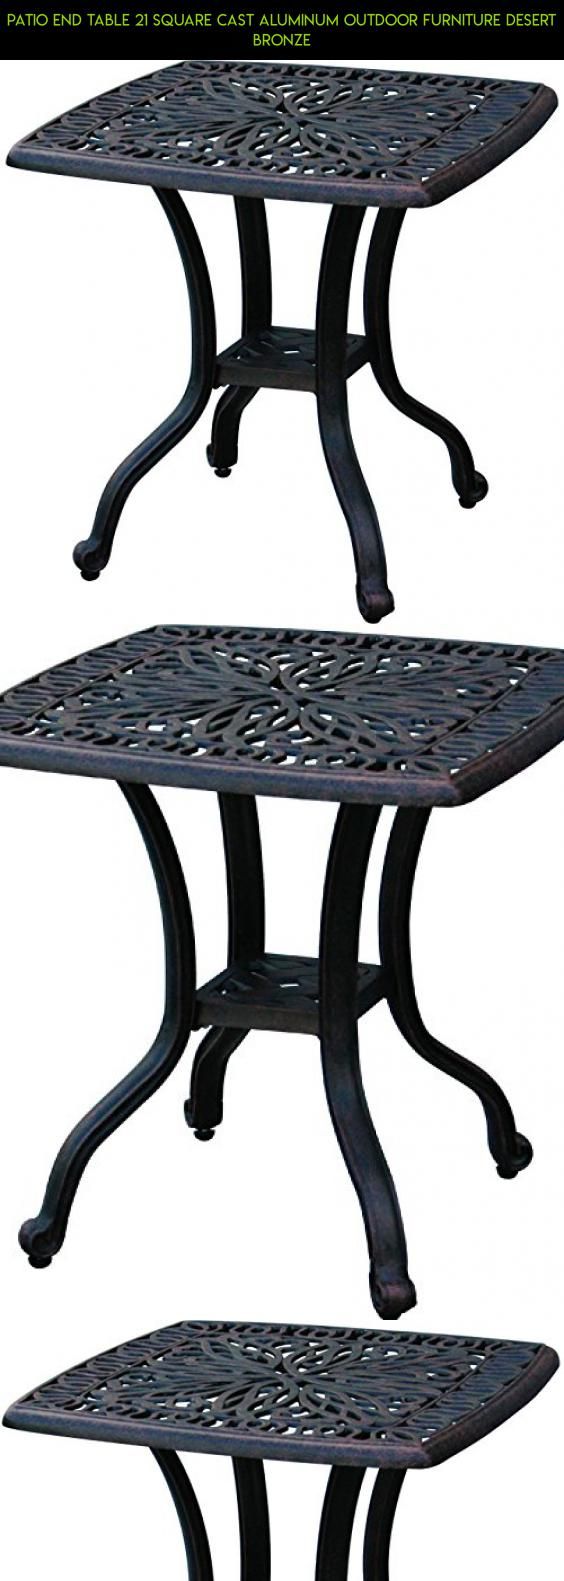 patio end table square cast aluminum outdoor furniture desert accent tables clearance bronze camera kit technology gadgets racing plans ikea garden sheds antique side small light